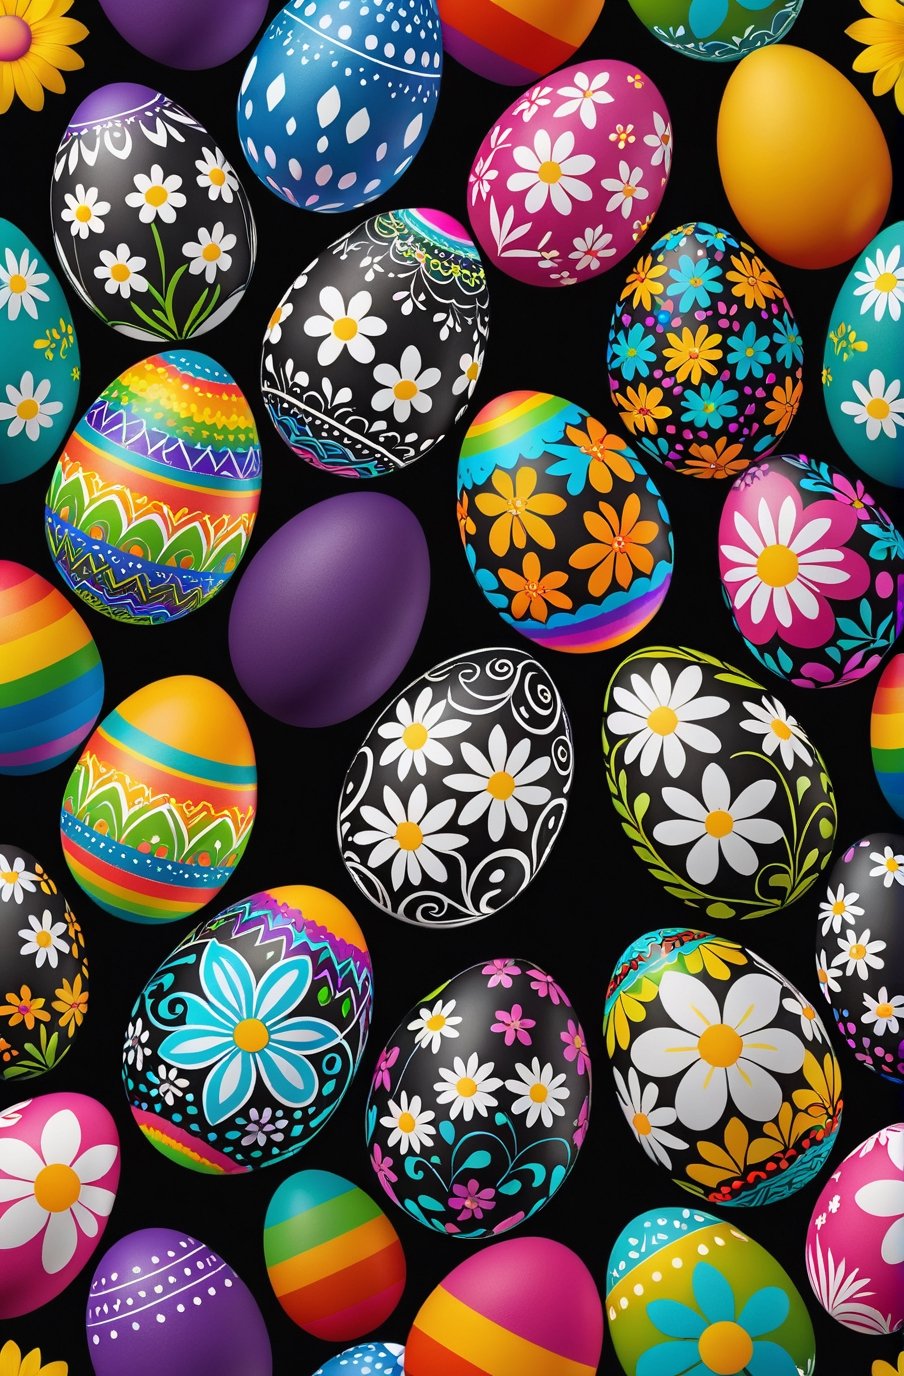 One Easter egg designed with pretty flowers and various patterns in a harmonious mix of rainbow colors.
Intense lighting illuminating eggs on a black background.

Ultra-clear, Ultra-detailed, ultra-realistic, ultra-close up